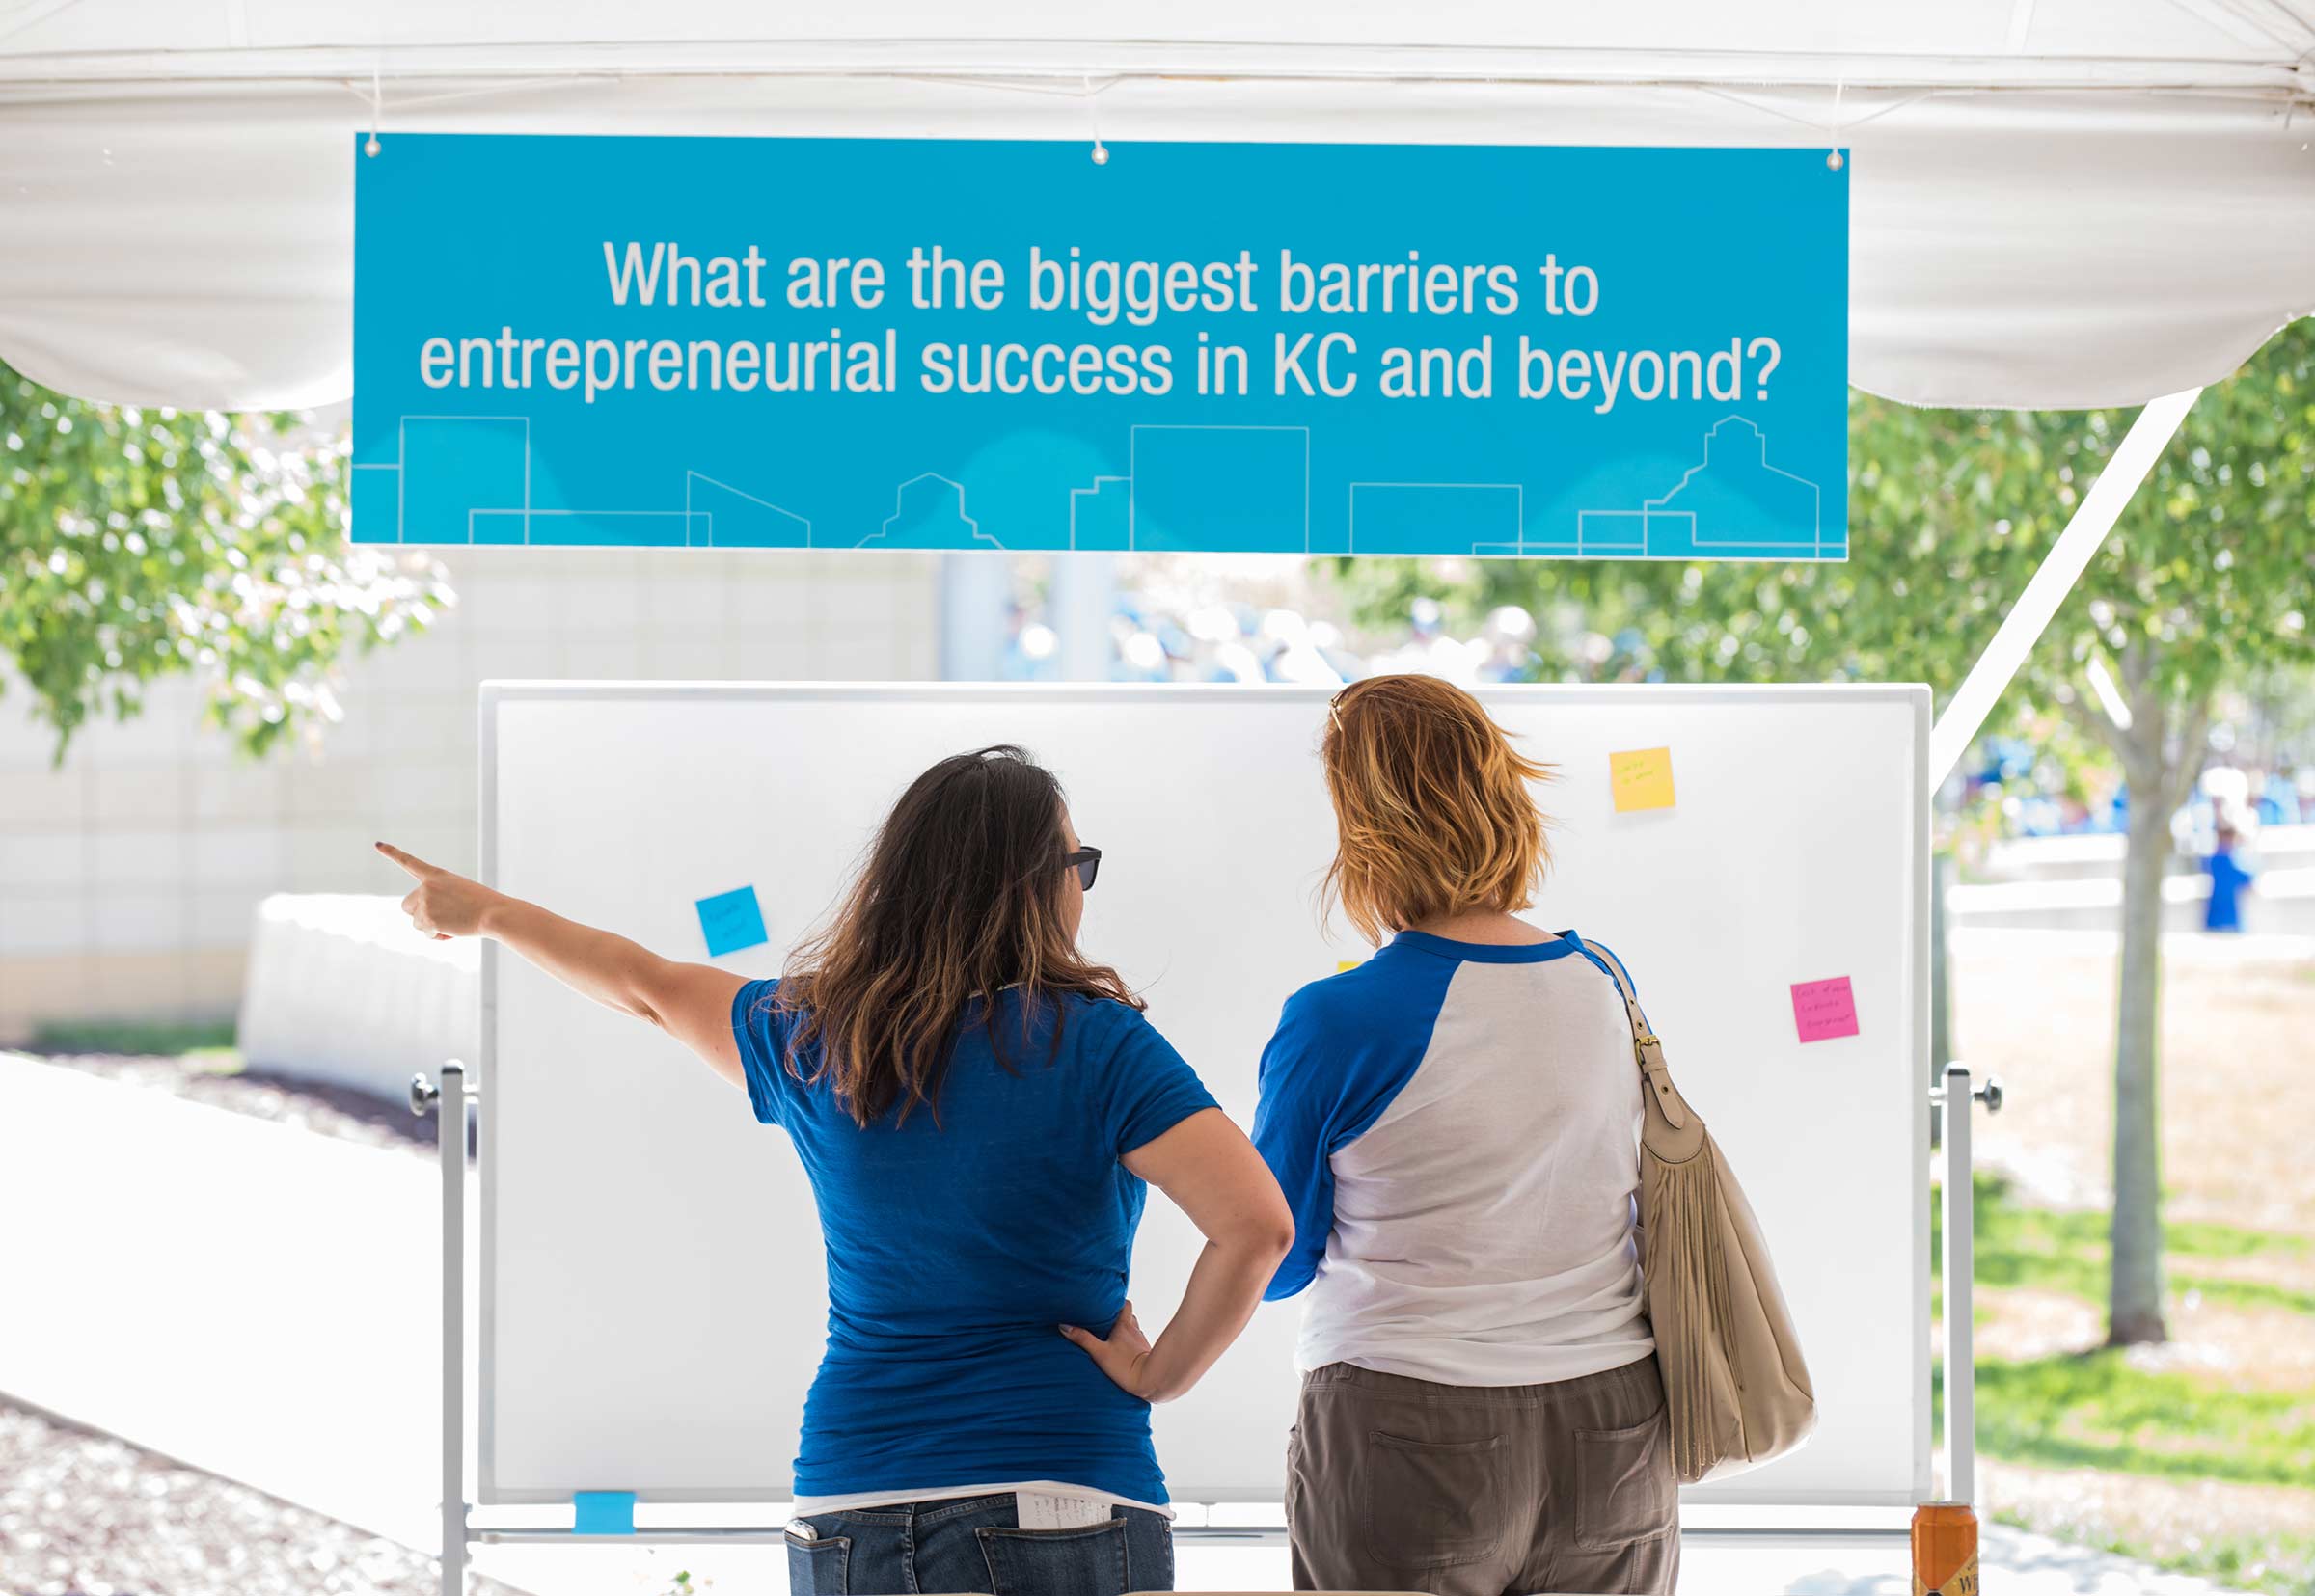 Two people stand underneath a tent outside. A blue banner hanging reads, "What are the biggest barriers to entrepreneurial success in KC and beyond?"